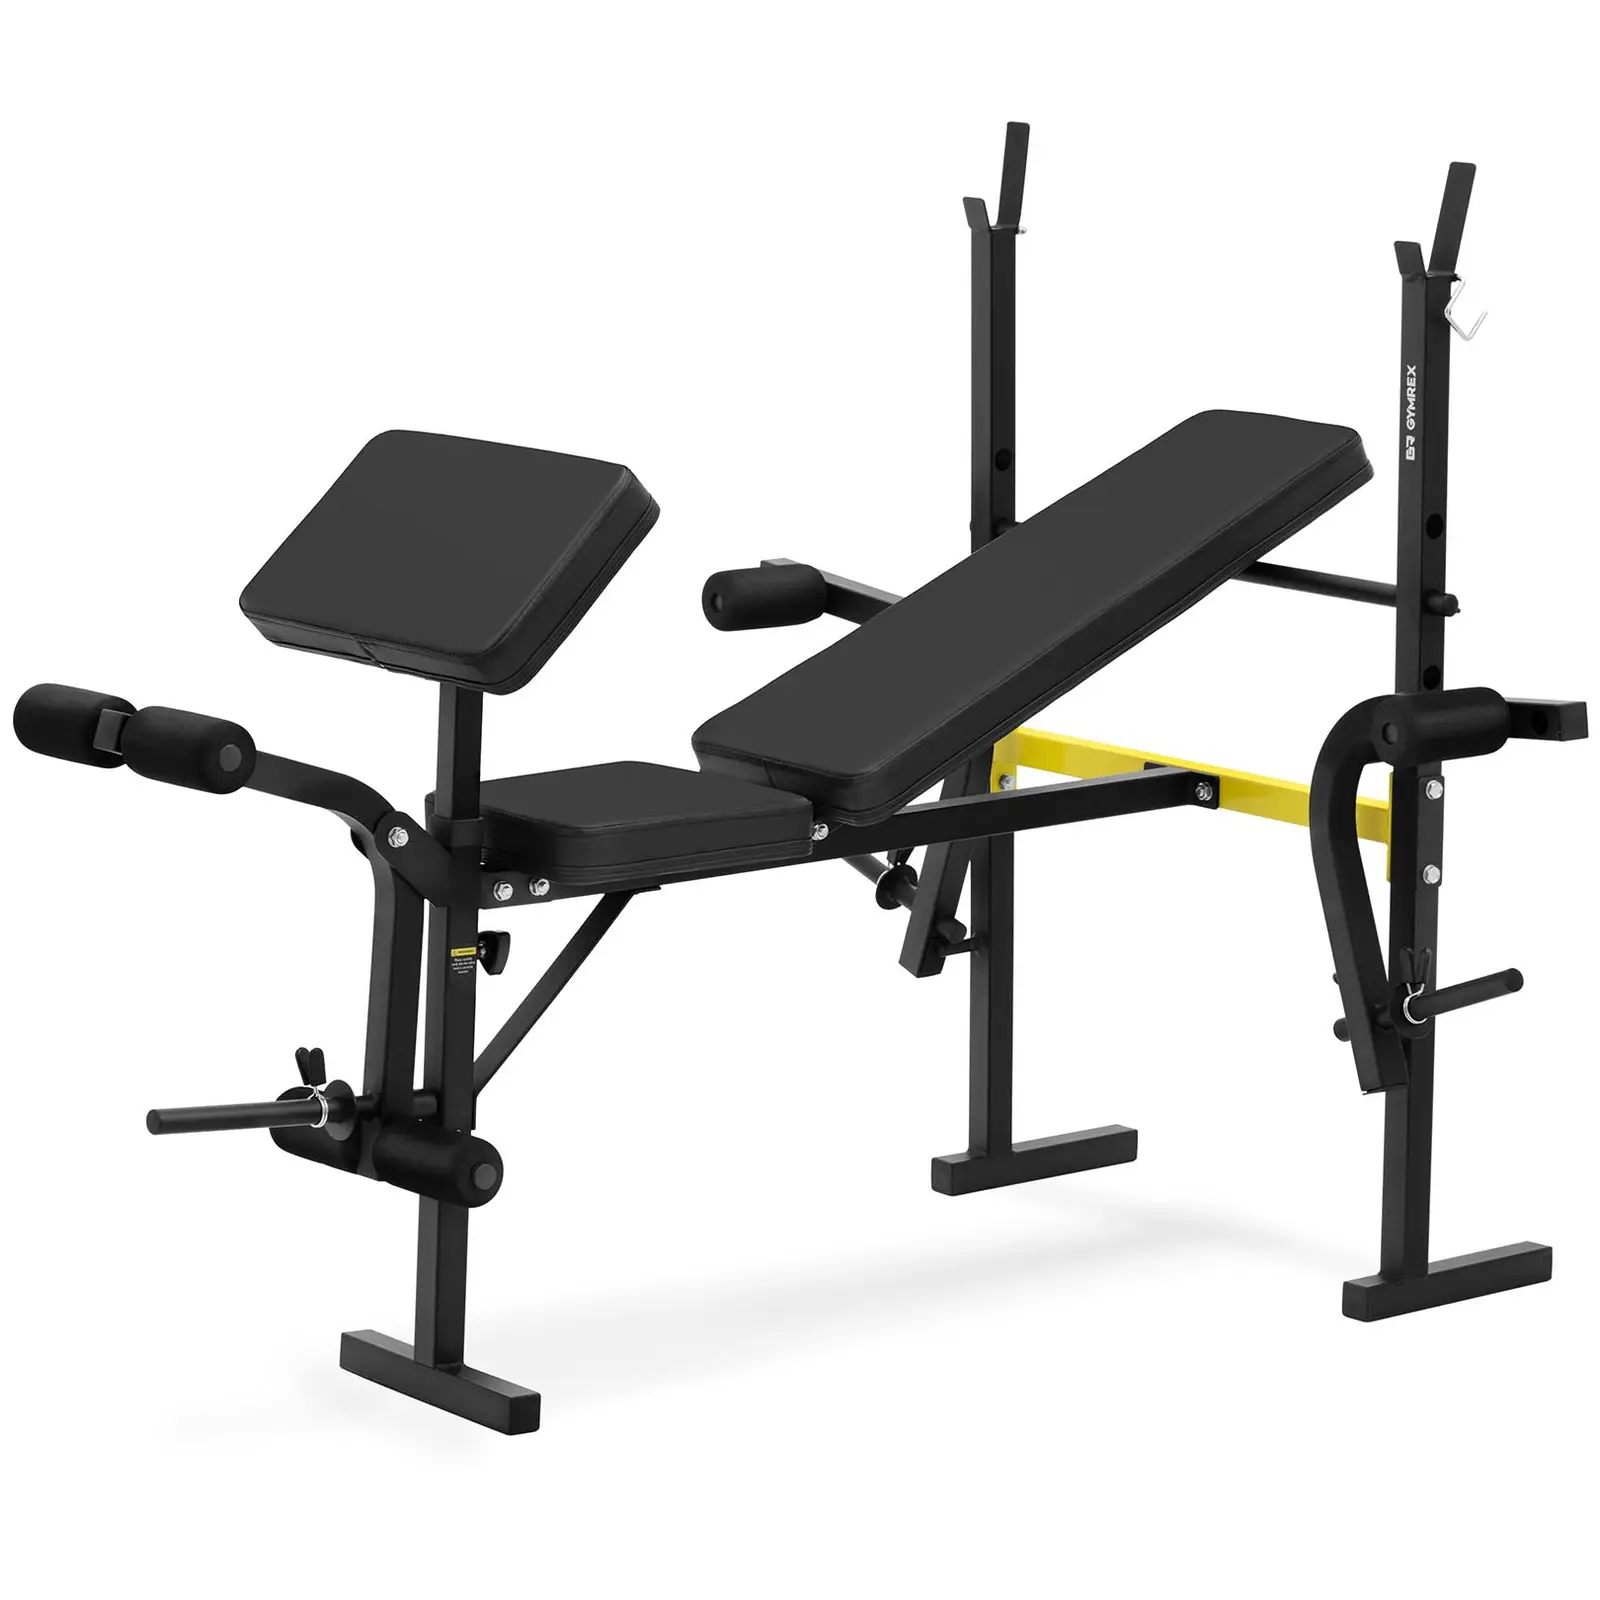 Factory second Multifunctional Weight Bench - supports up to 100 kg - adjustable